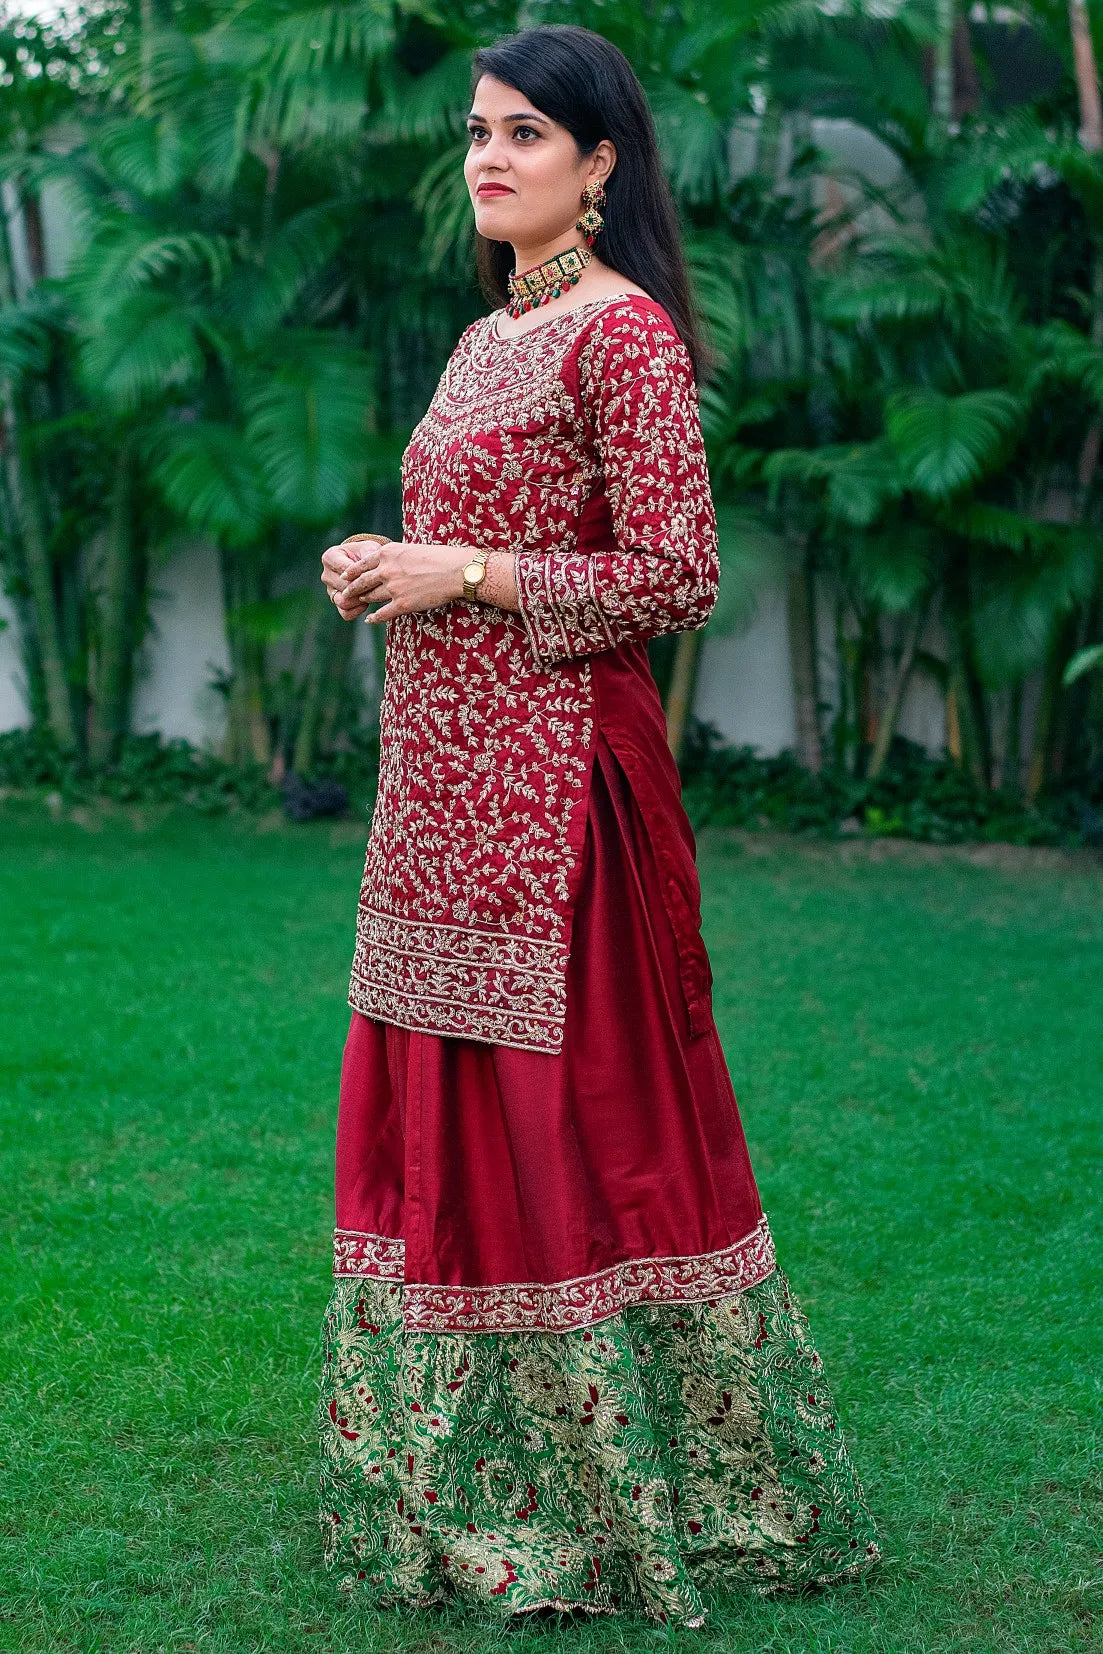 A beautifully adorned Gharara set, featuring intricate hand embroidery on the rich maroon silk fabric.